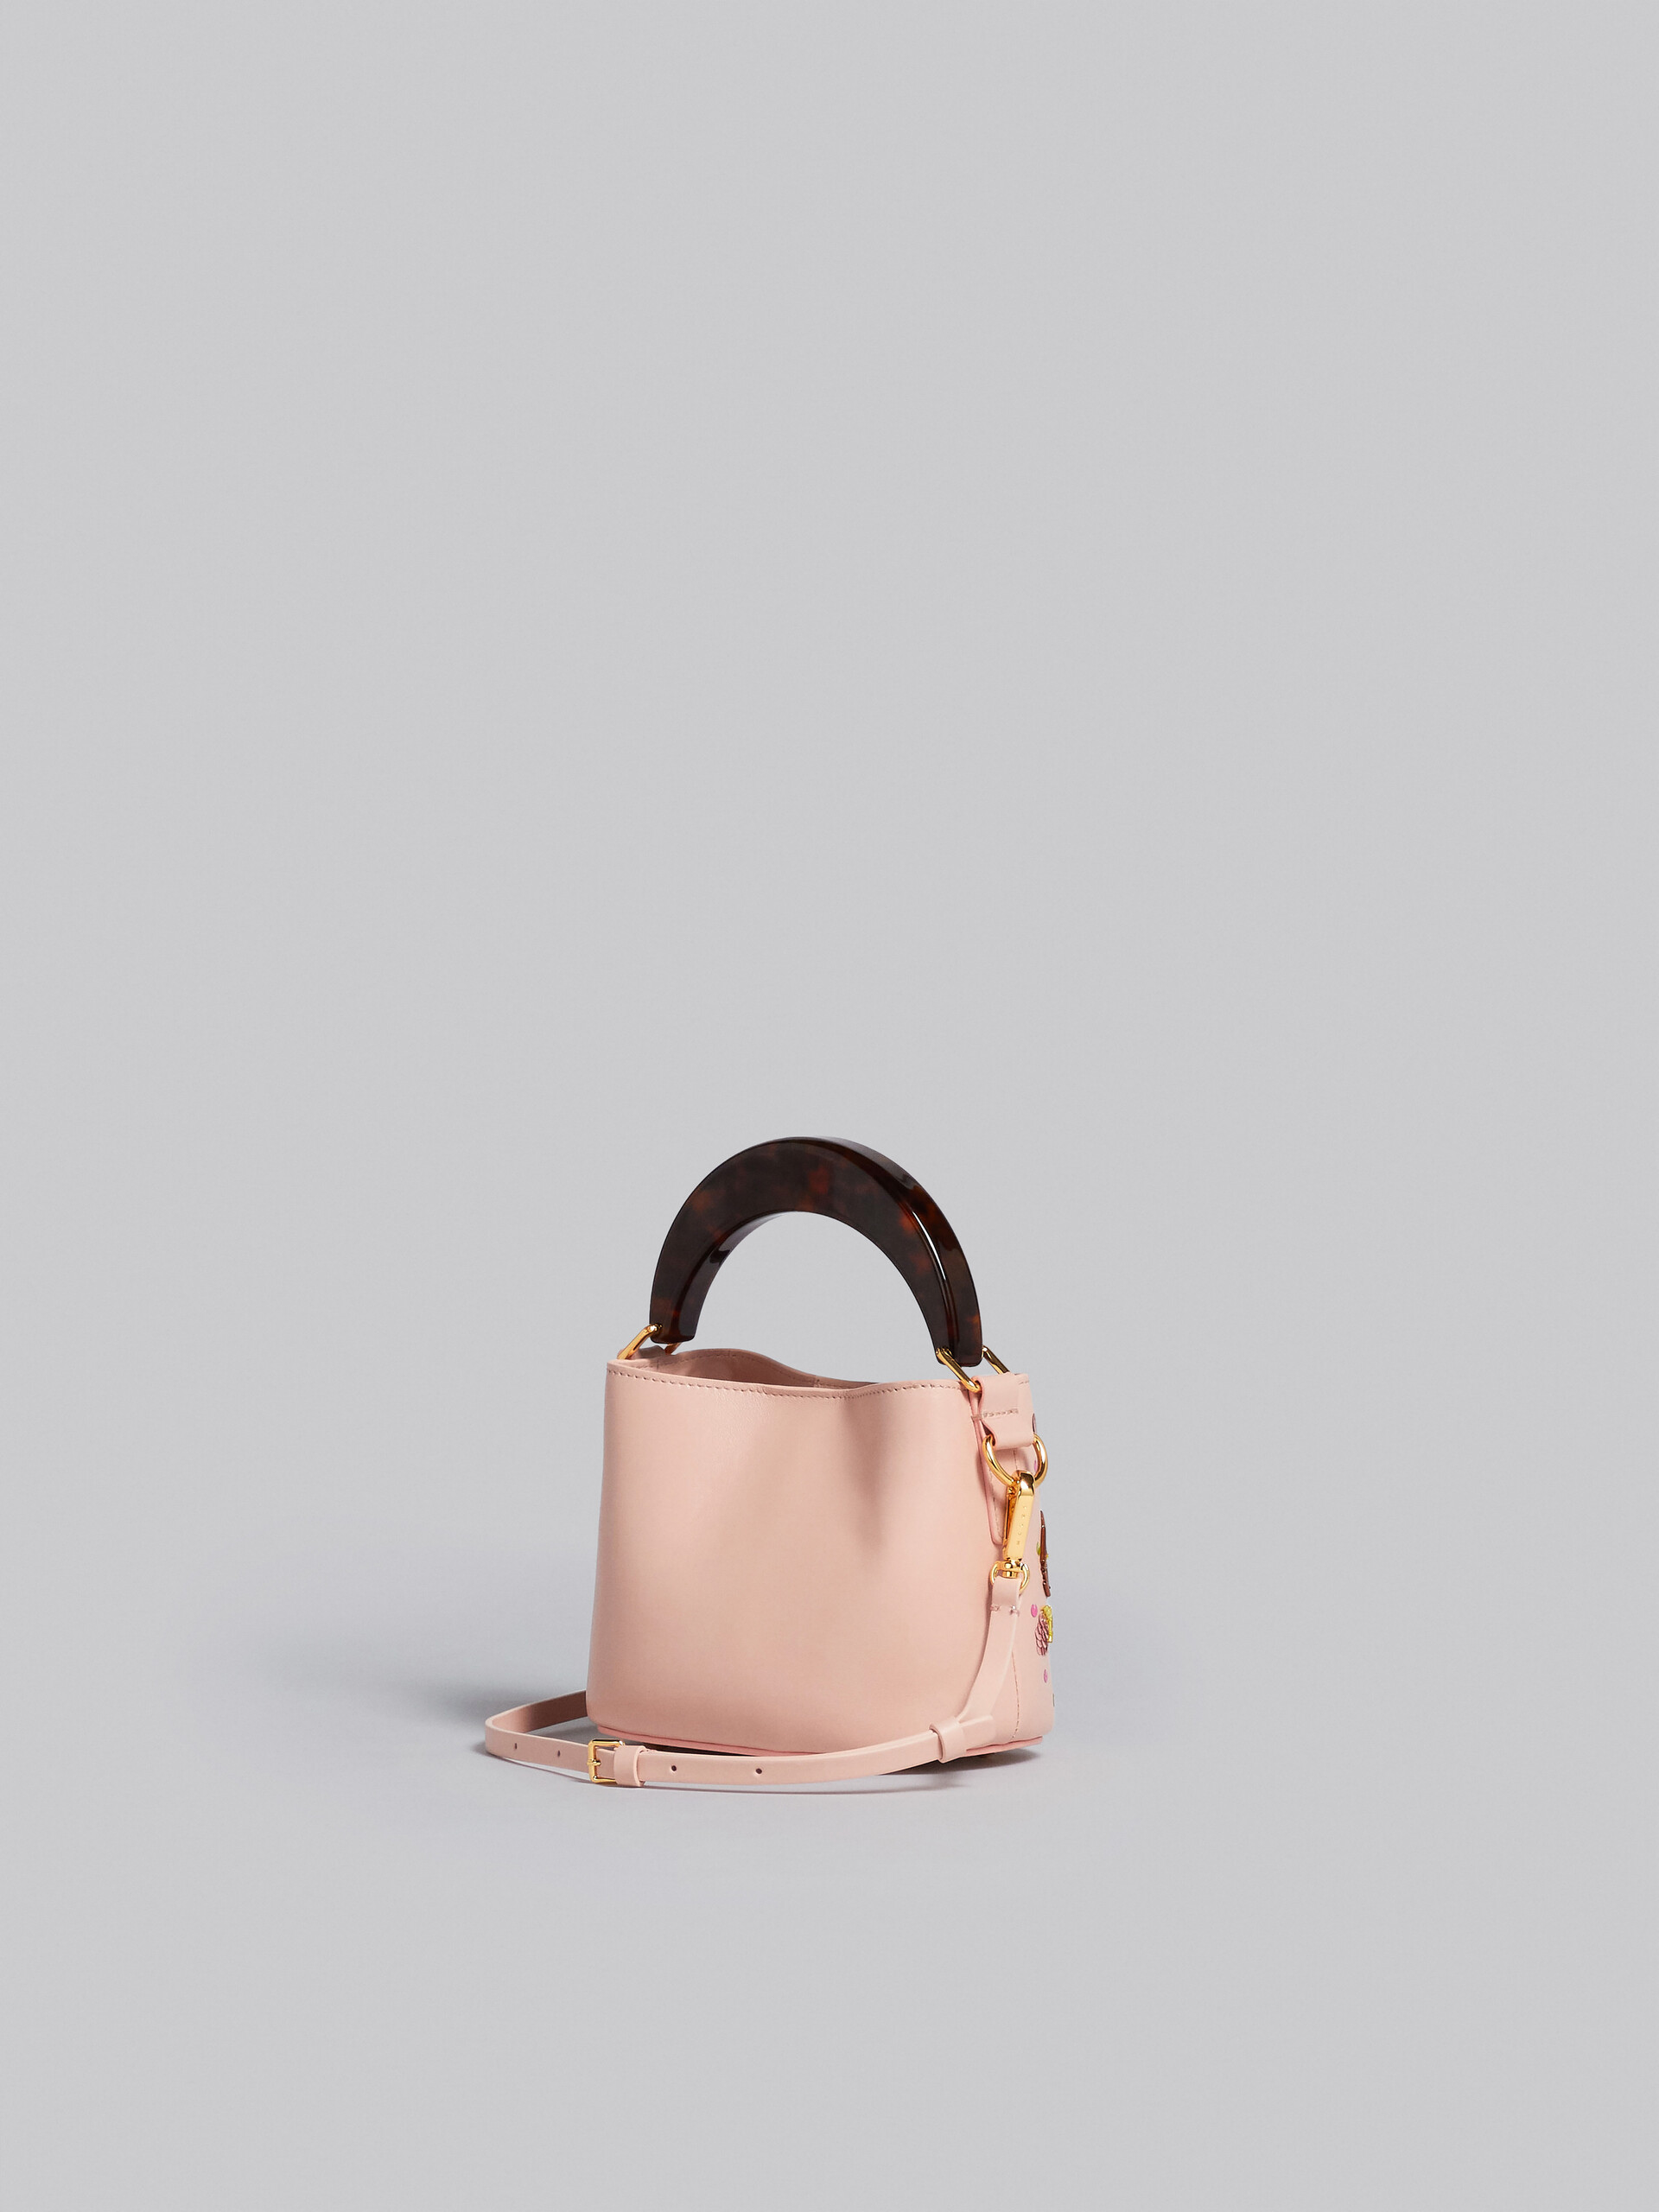 Venice Mini Bucket in embroidered pink leather - Shoulder Bag - Image 2